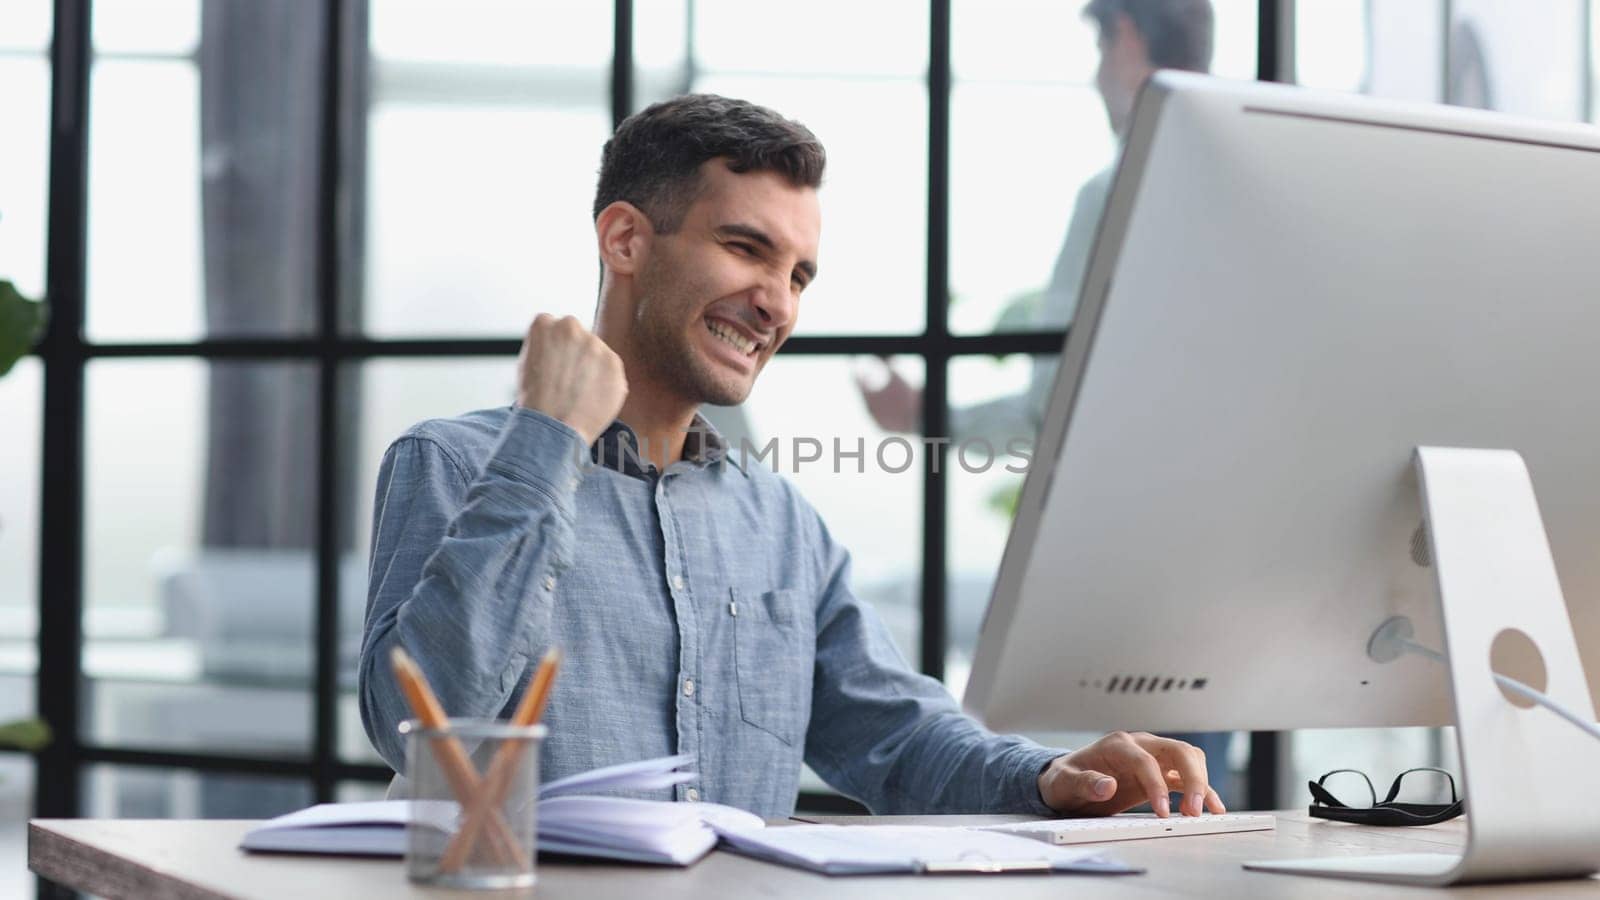 Happy businessman rejoices at success in the workplace in the office, looks up with a euphoric expression on his face. by Prosto